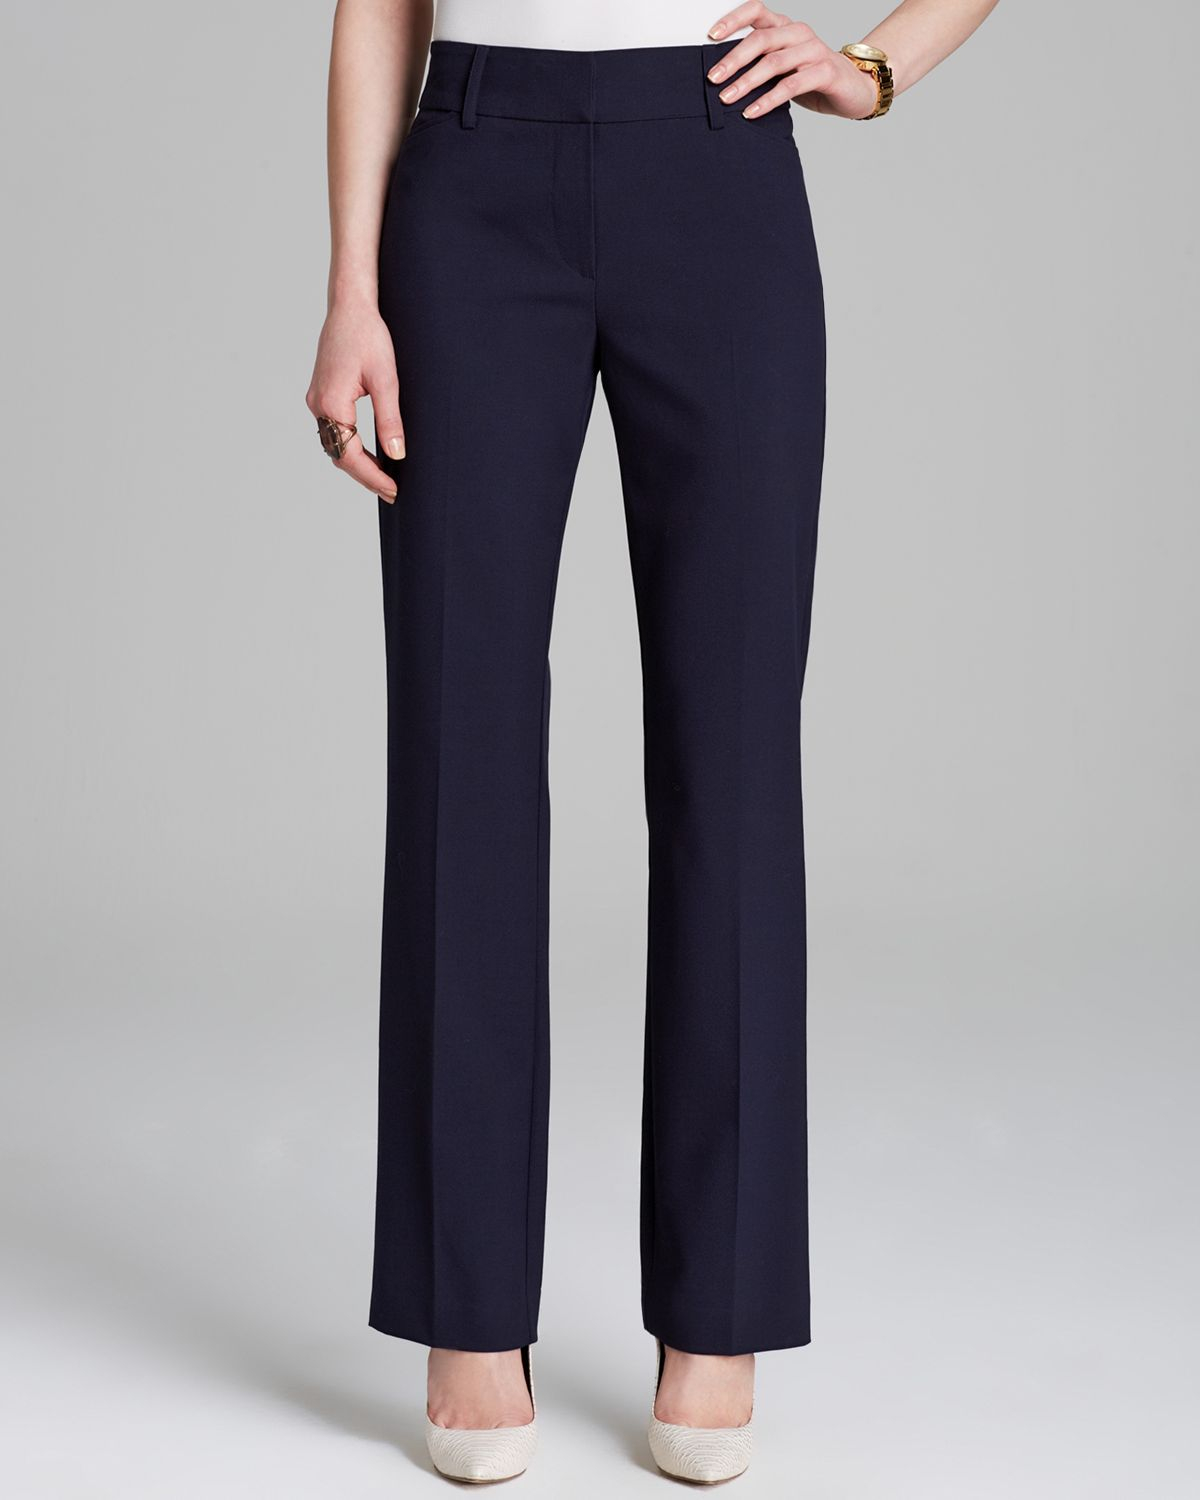 Adrianna Papell Notch Back Bistretch Pants in Blue - Lyst